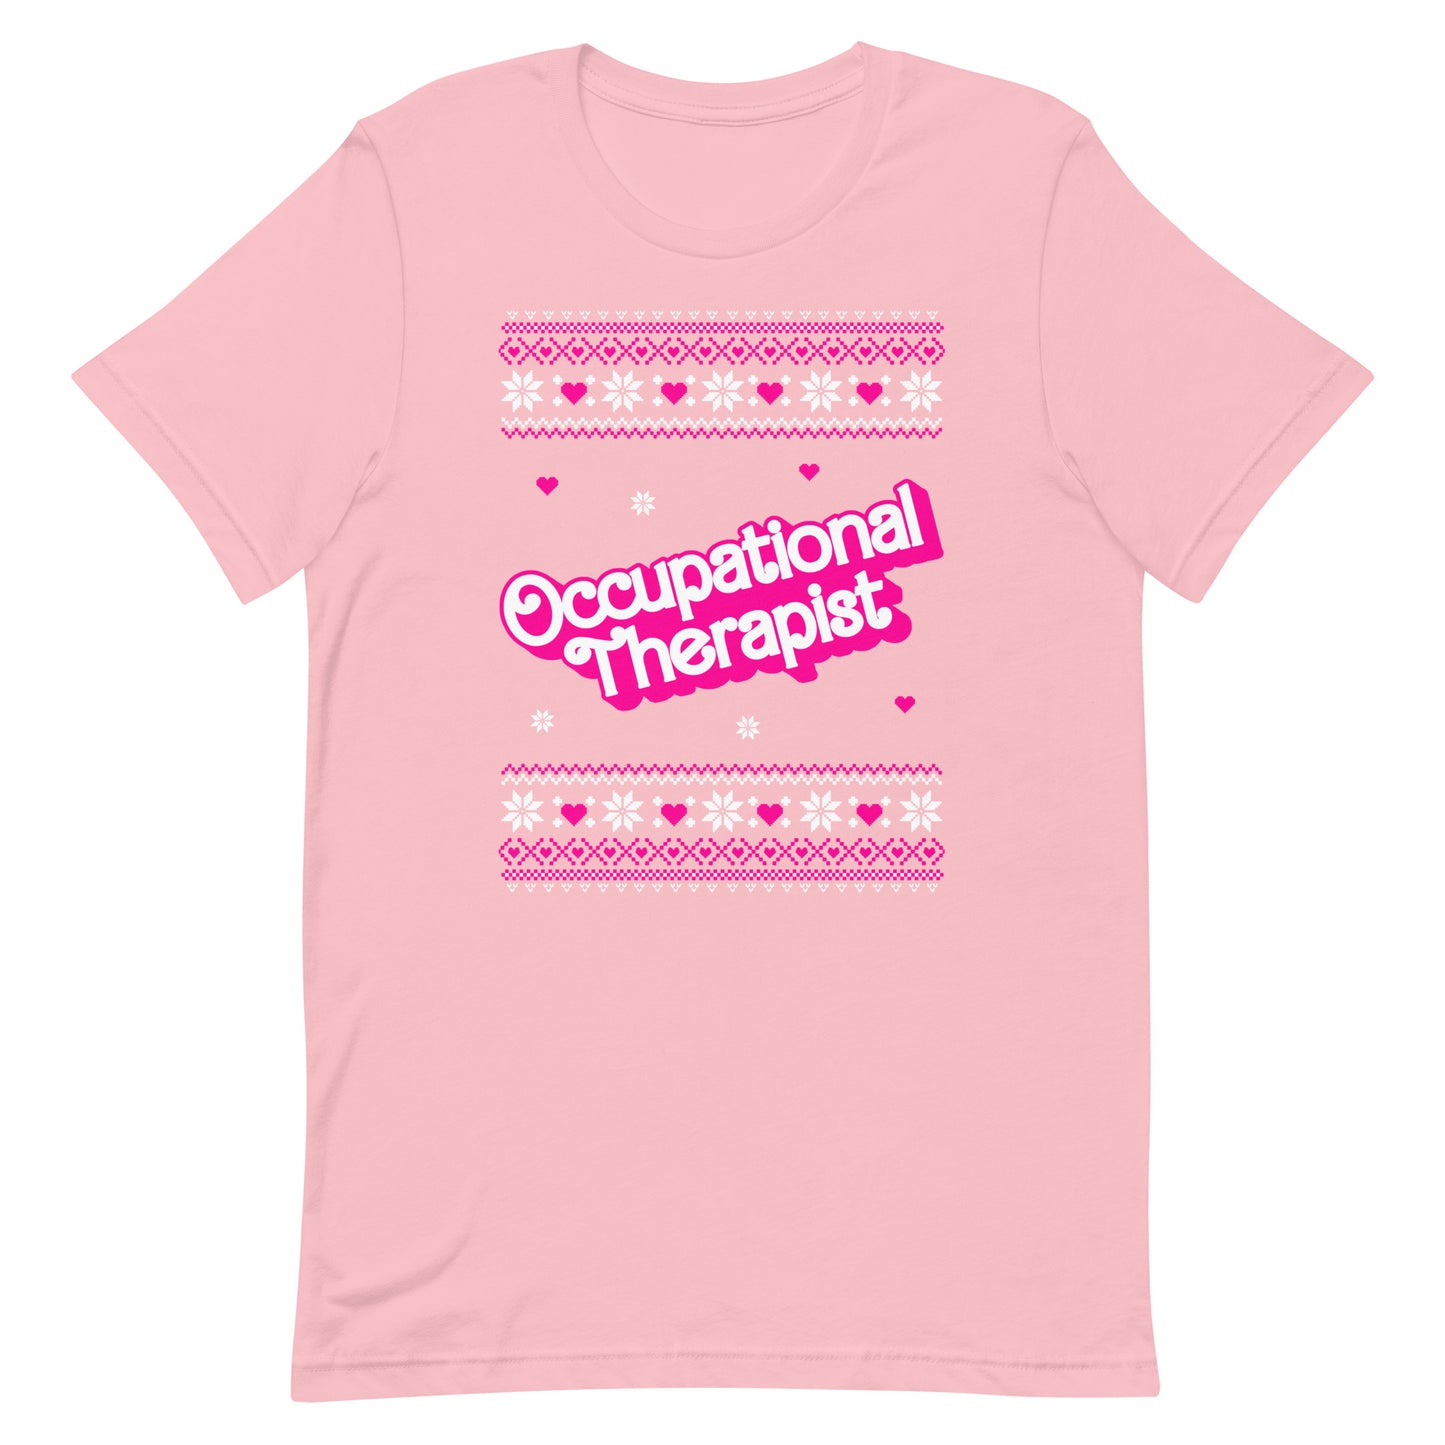 Barbie Occupational Therapist Christmas T-shirt